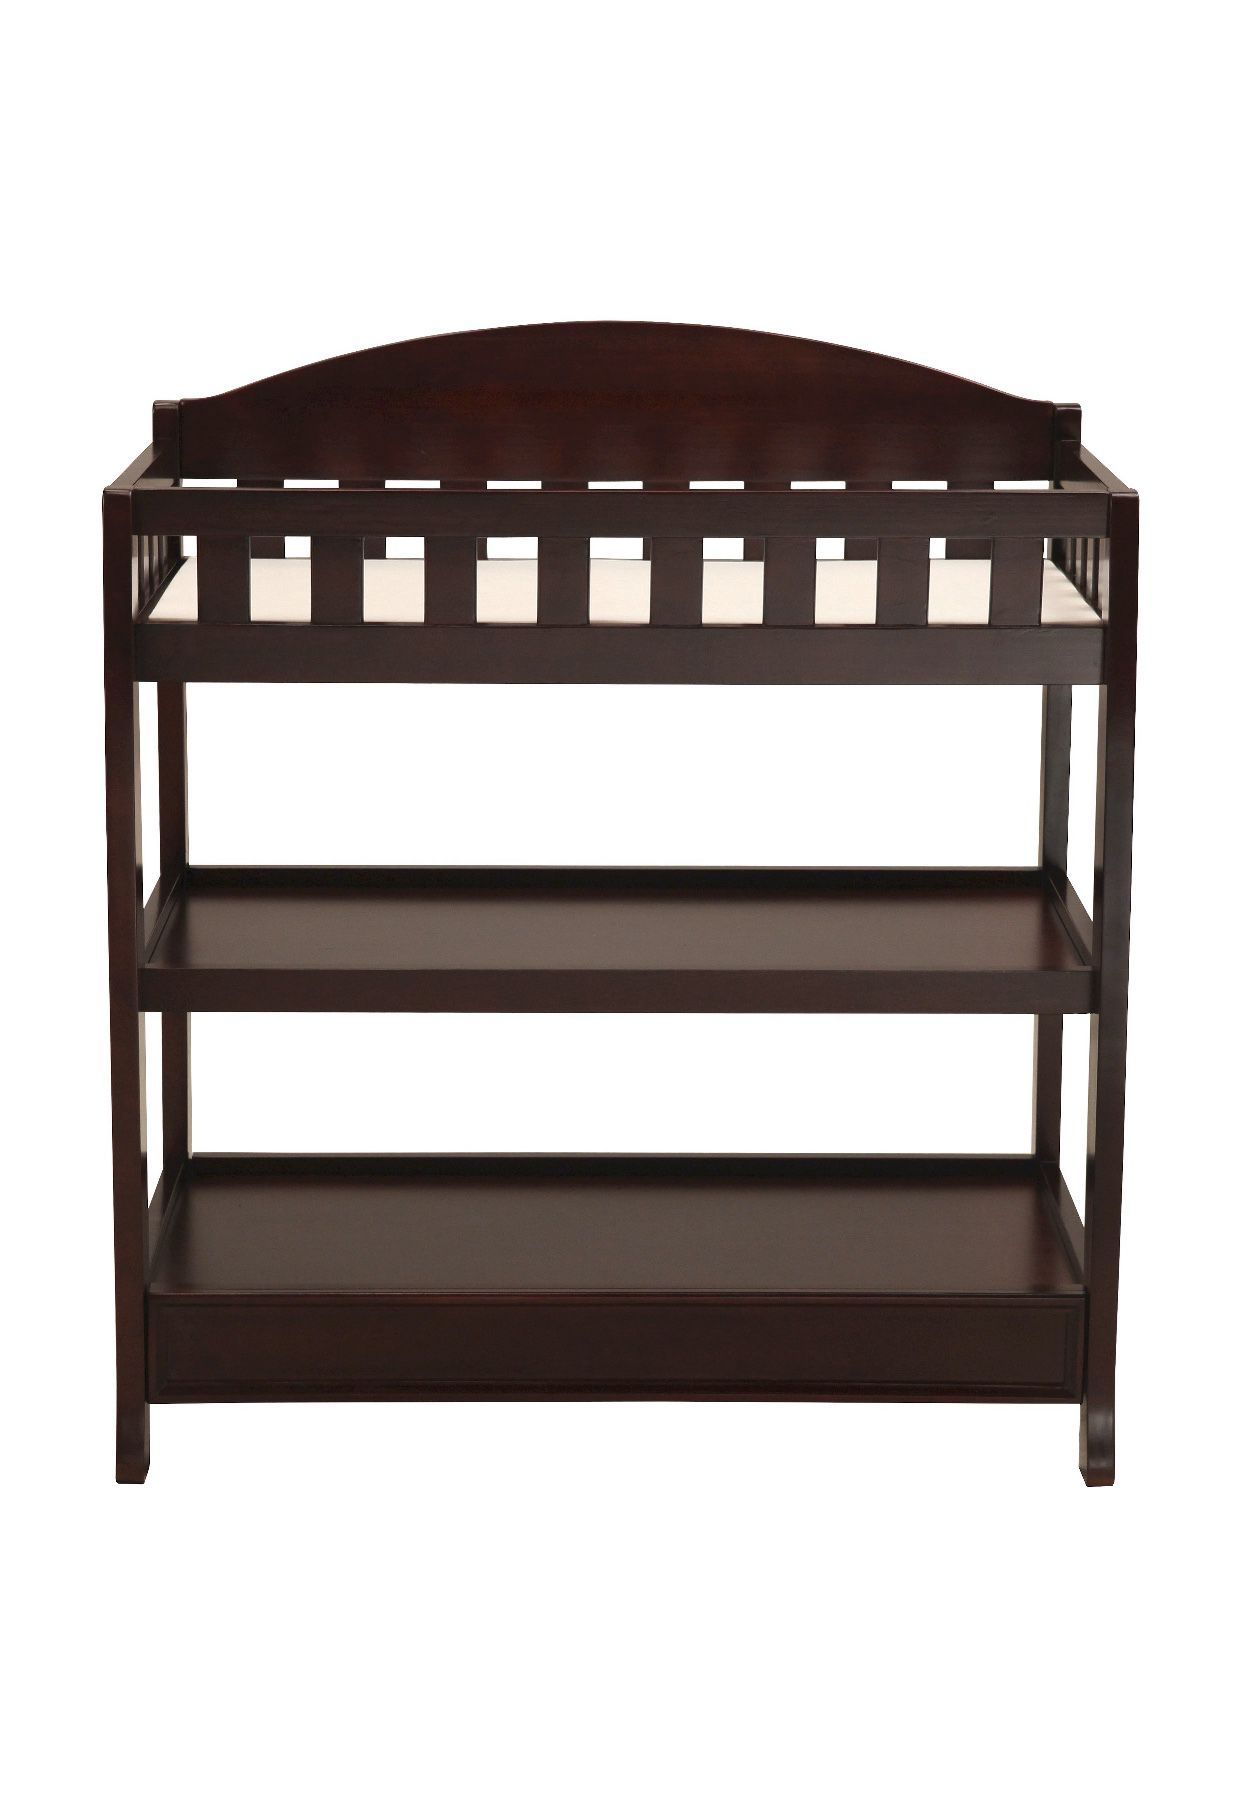 FREE Changing Table